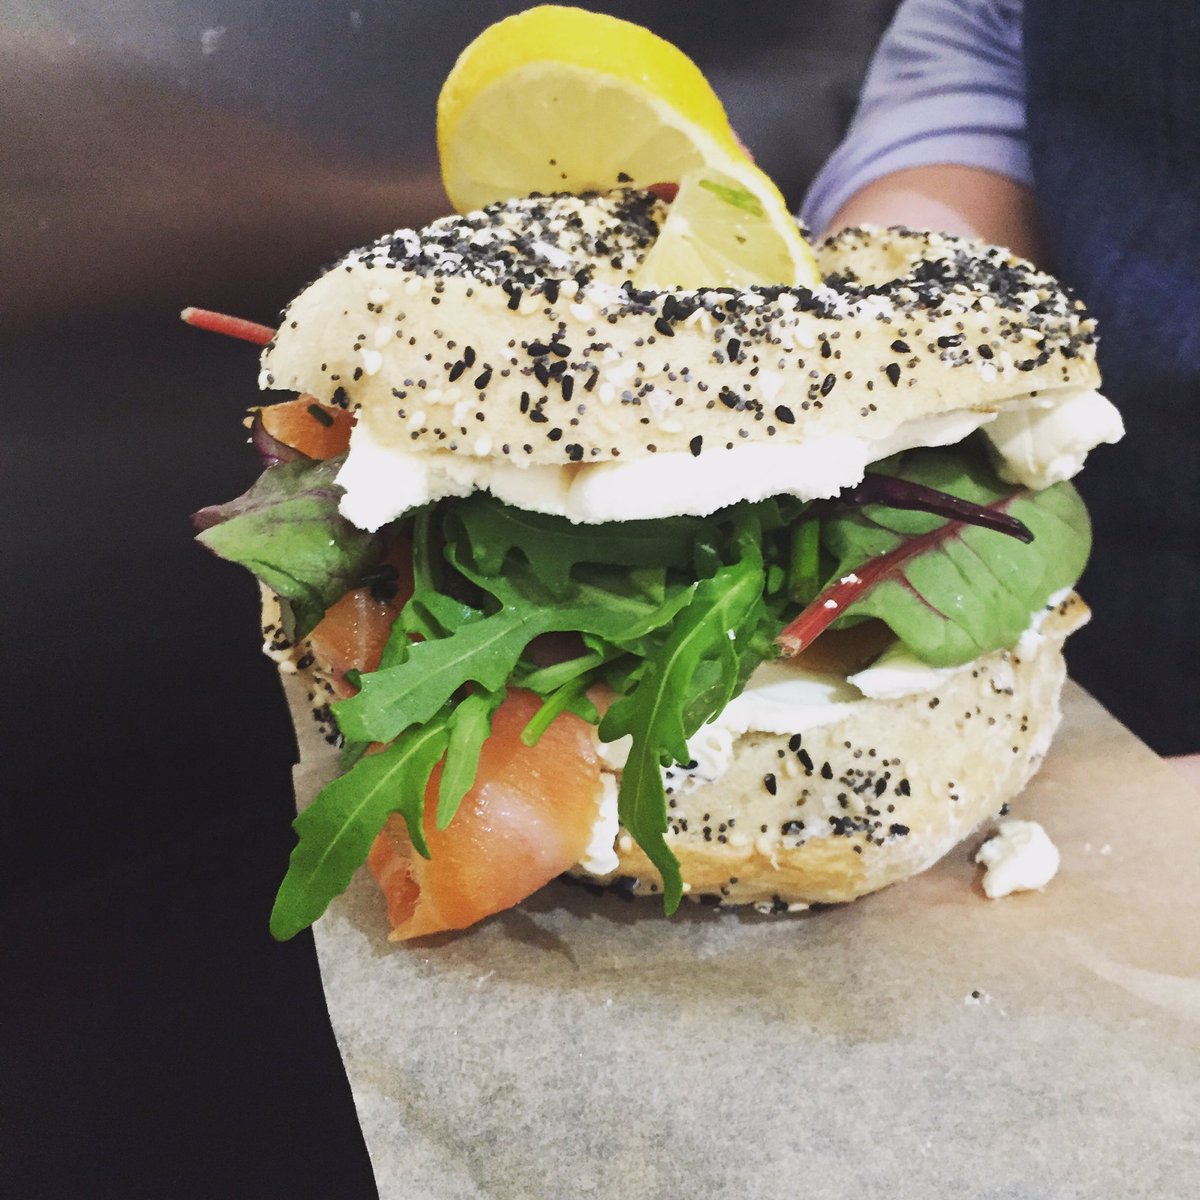 Our salmon & cream cheese bagel.. #donetherightway #bakery #Bristol